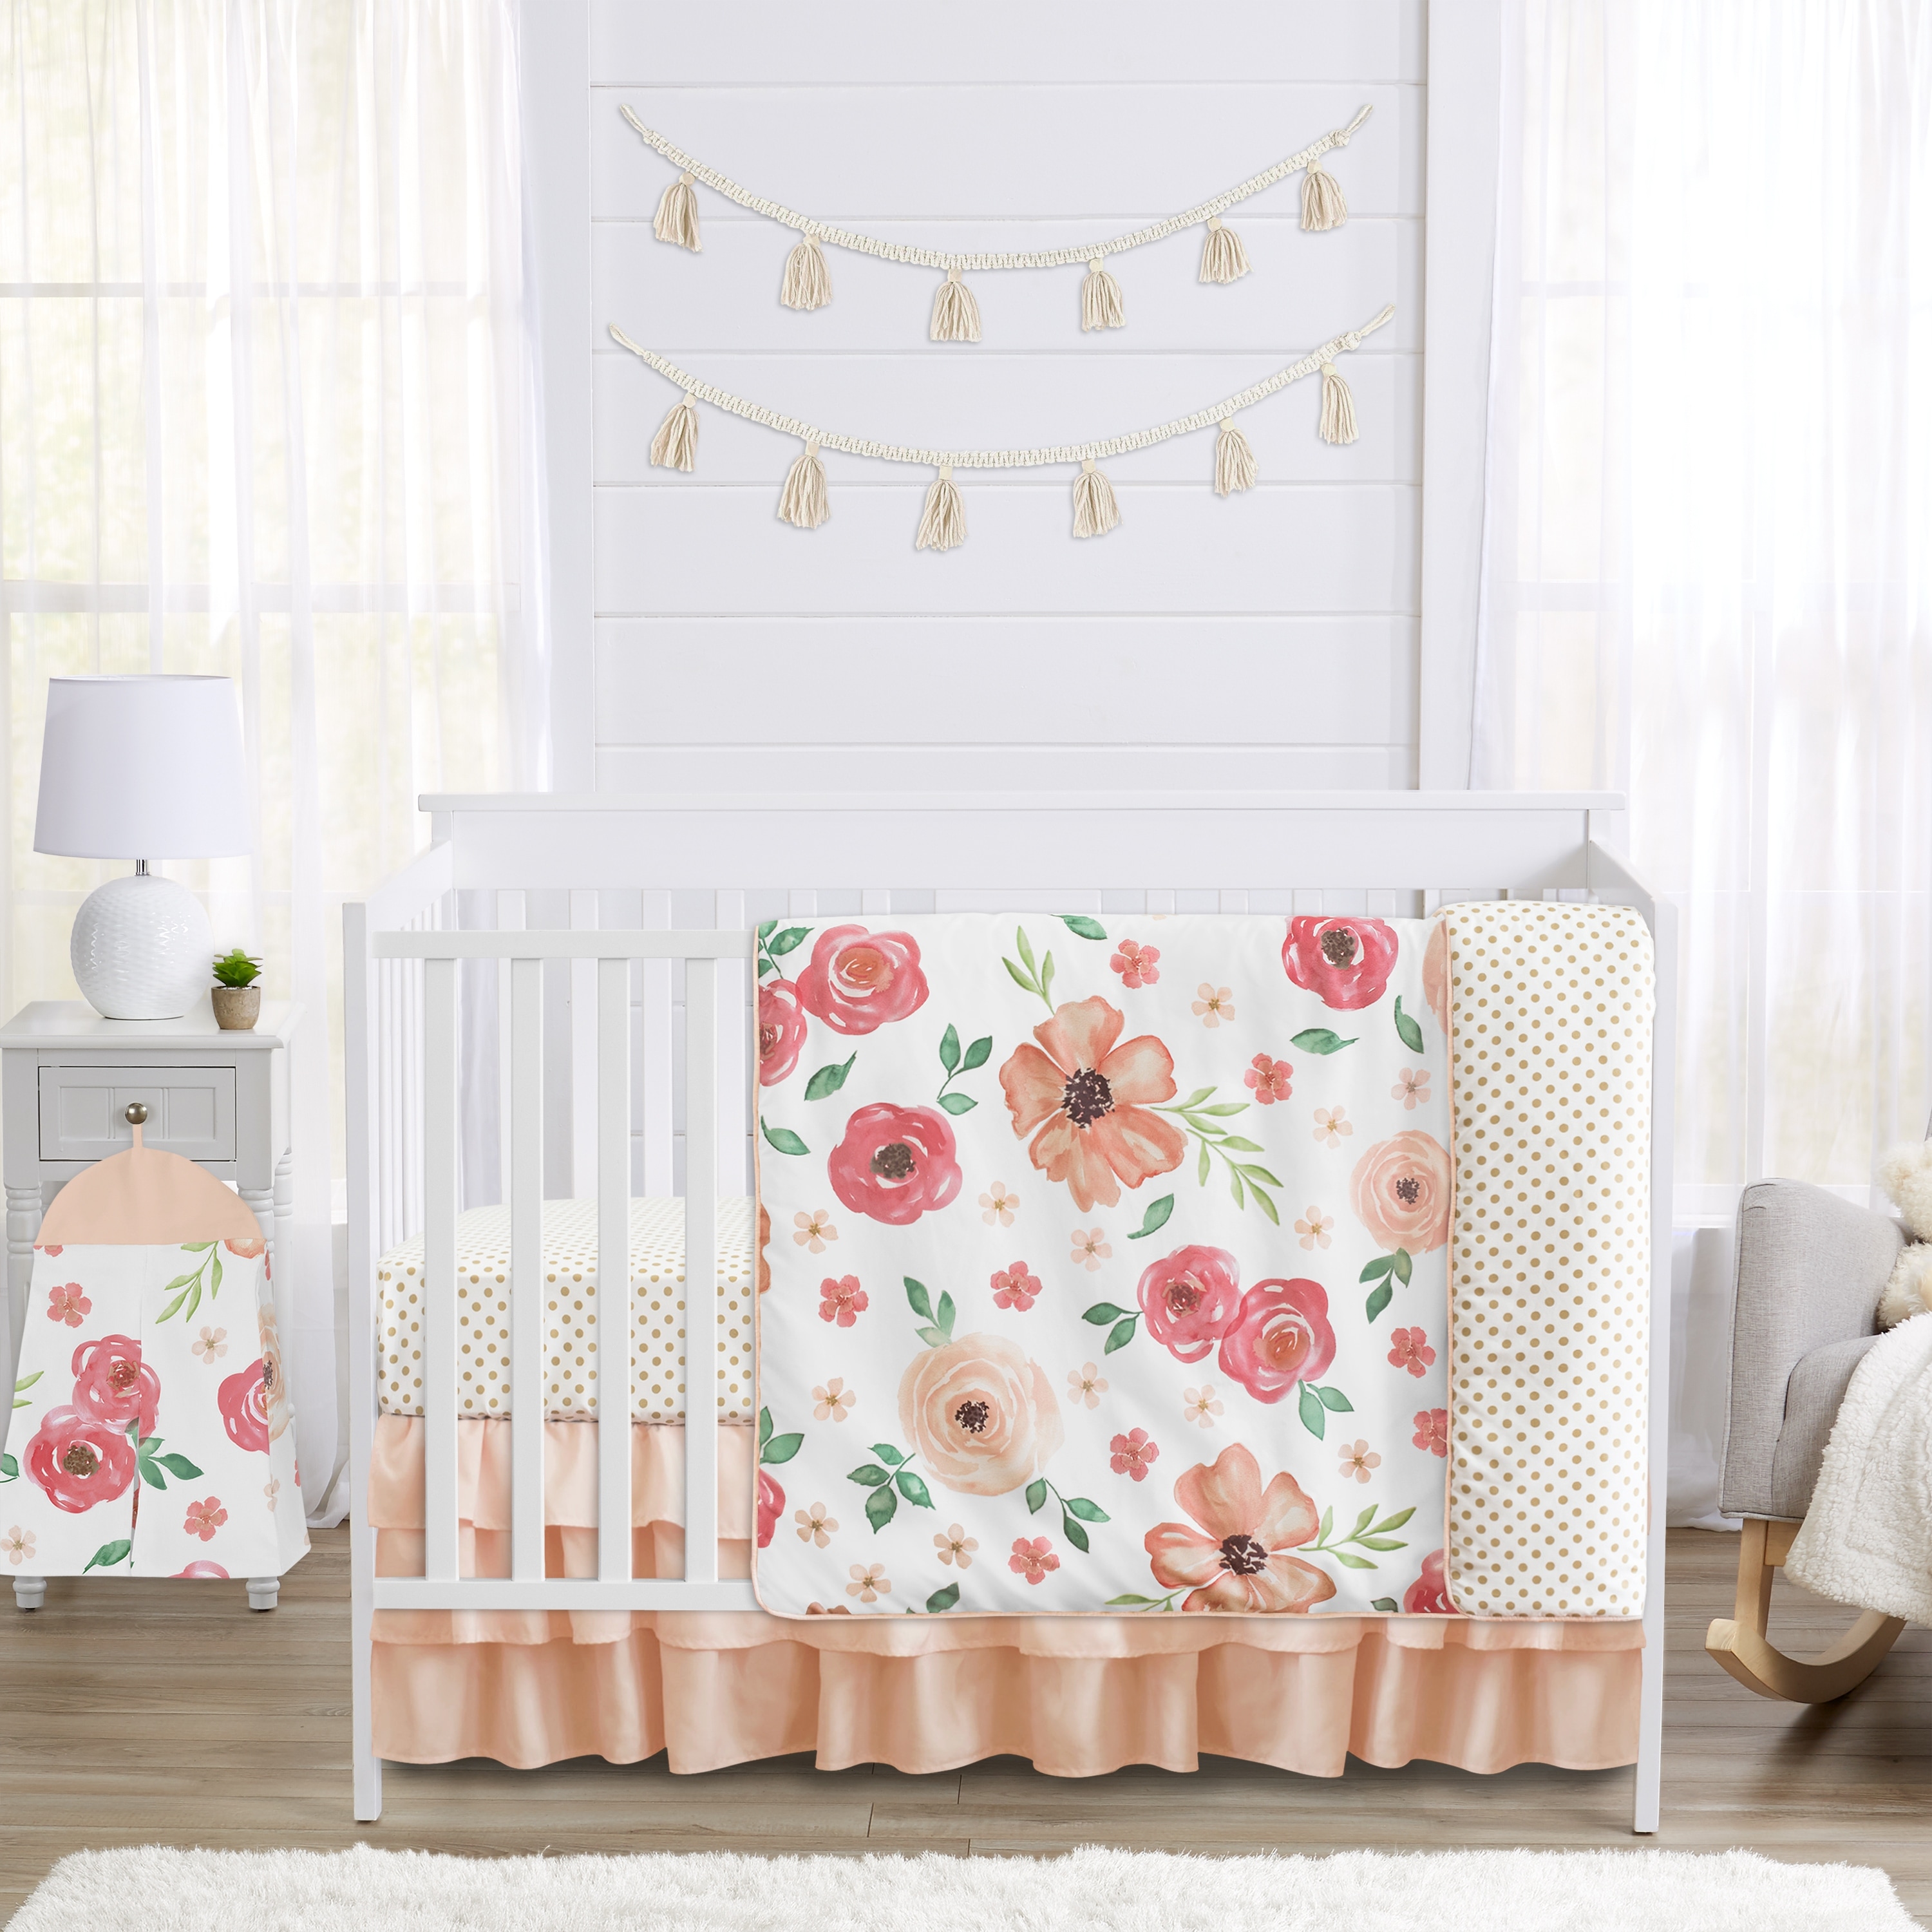 Sweet Jojo Designs Peach and Green Shabby Chic Watercolor Floral Collection Girl 4-piece Crib Bedding Set